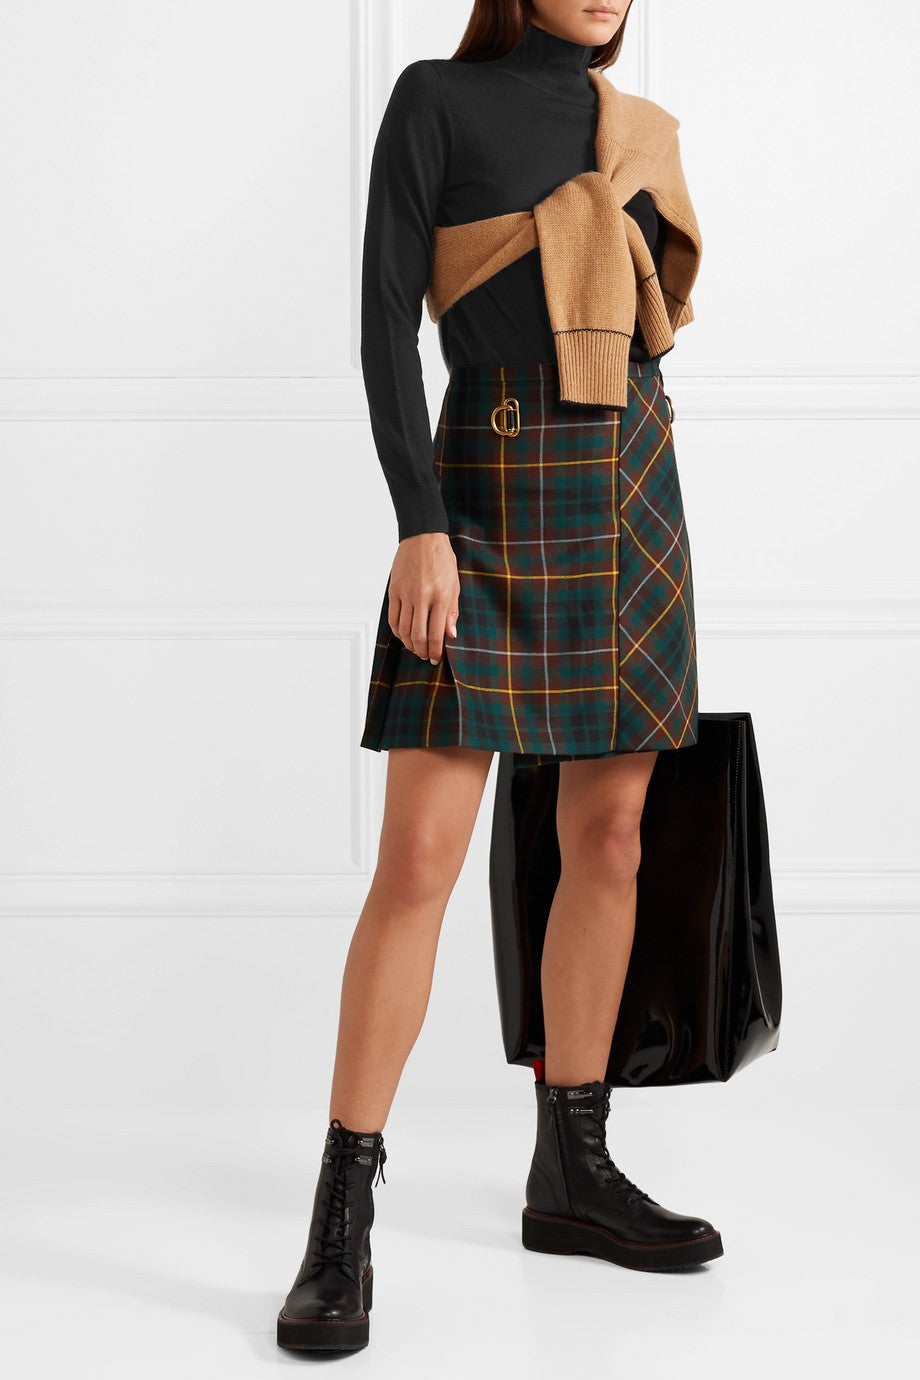 Burberry + Our Favourite Picks From The Net-A-Porter Sale